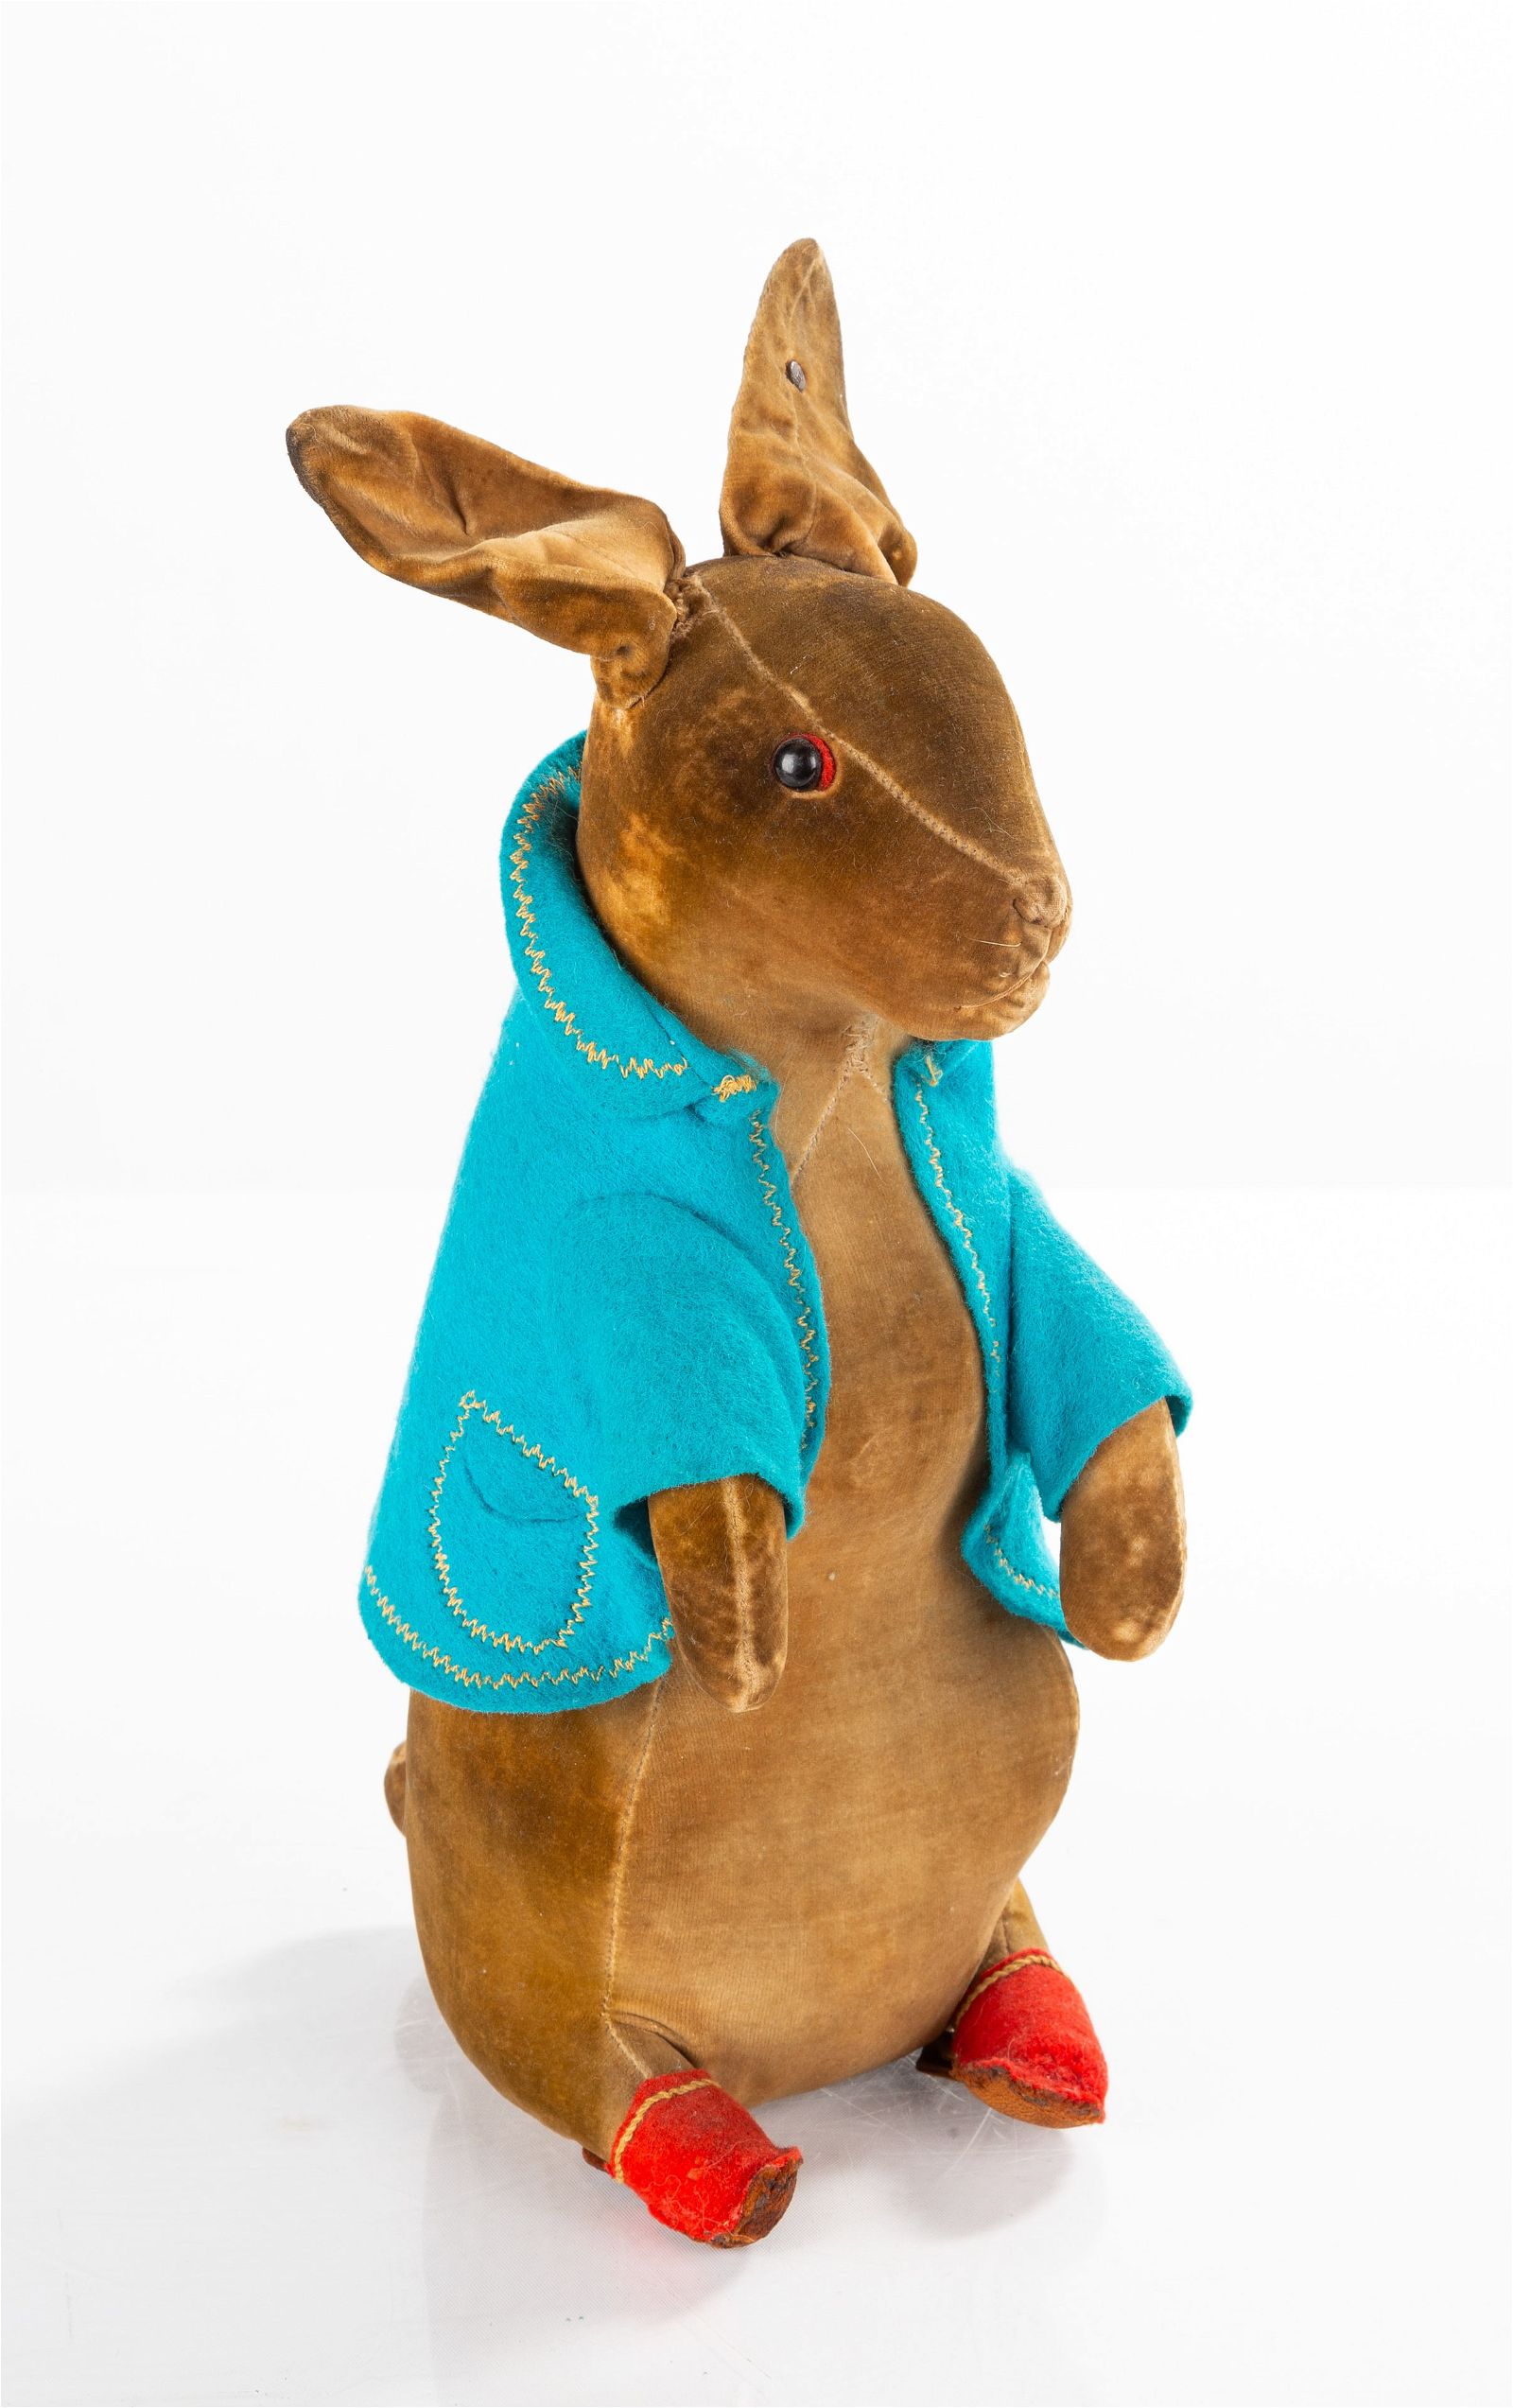 Circa-1910 Beatrix Potter Peter Rabbit stuffed animal by Steiff, with a metal Steiff button in one ear, which sold for $9,500 ($11,875 with buyer’s premium) at Cottone.